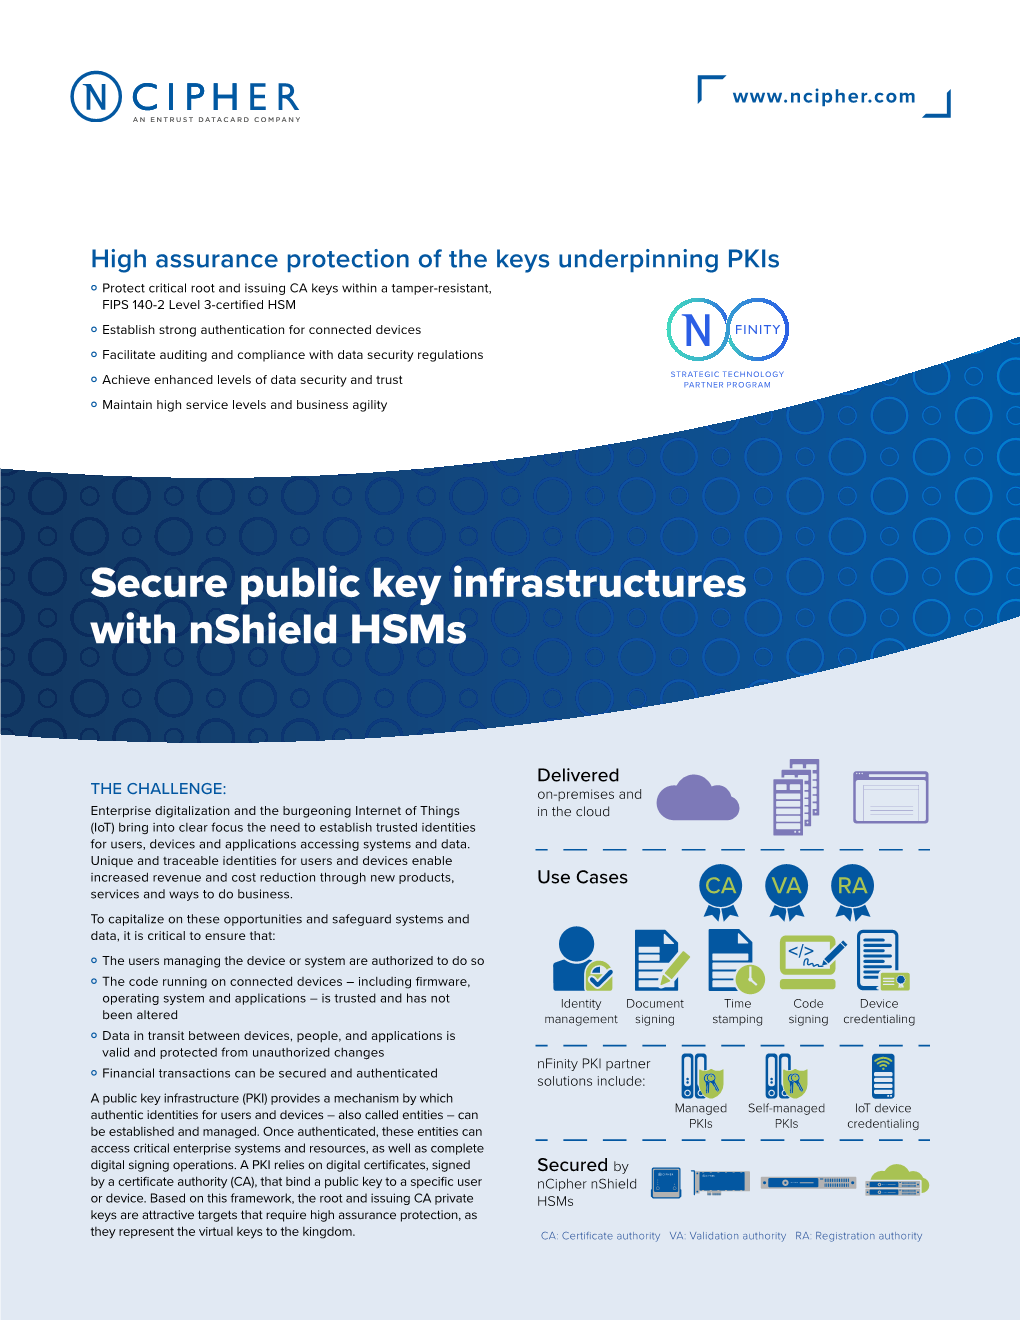 Secure Public Key Infrastructures with Nshield Hsms